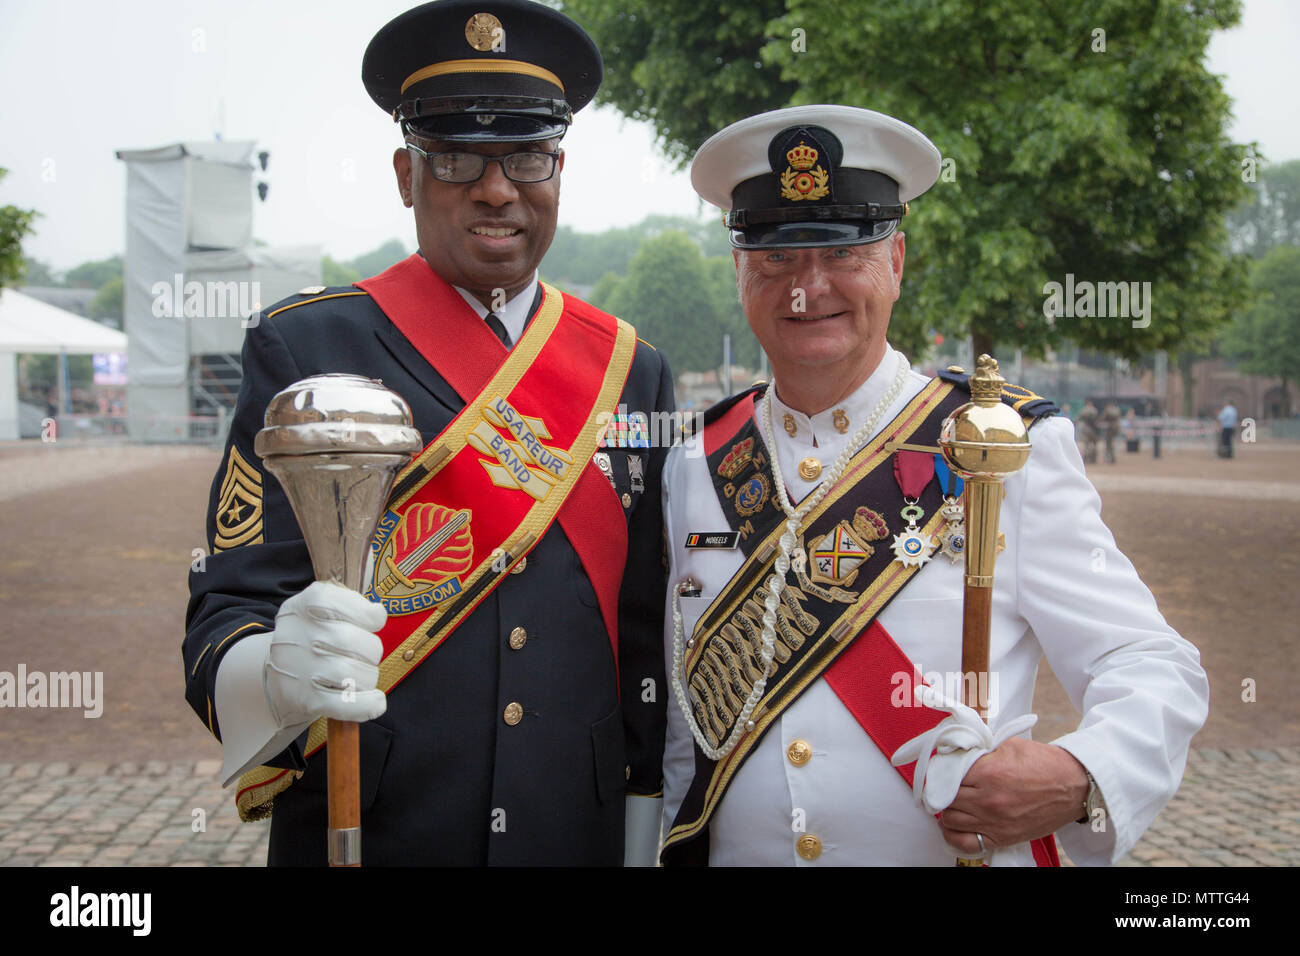 US drum major SGM Jesse L. Hughes Jr. stands alongside Major Hans Moreels of the German Heeresmusikorps during the Citadelle 350 anniversary military show, May 25, 2018.  US Army photo by SGT Joseph Agacinski/released. Stock Photo